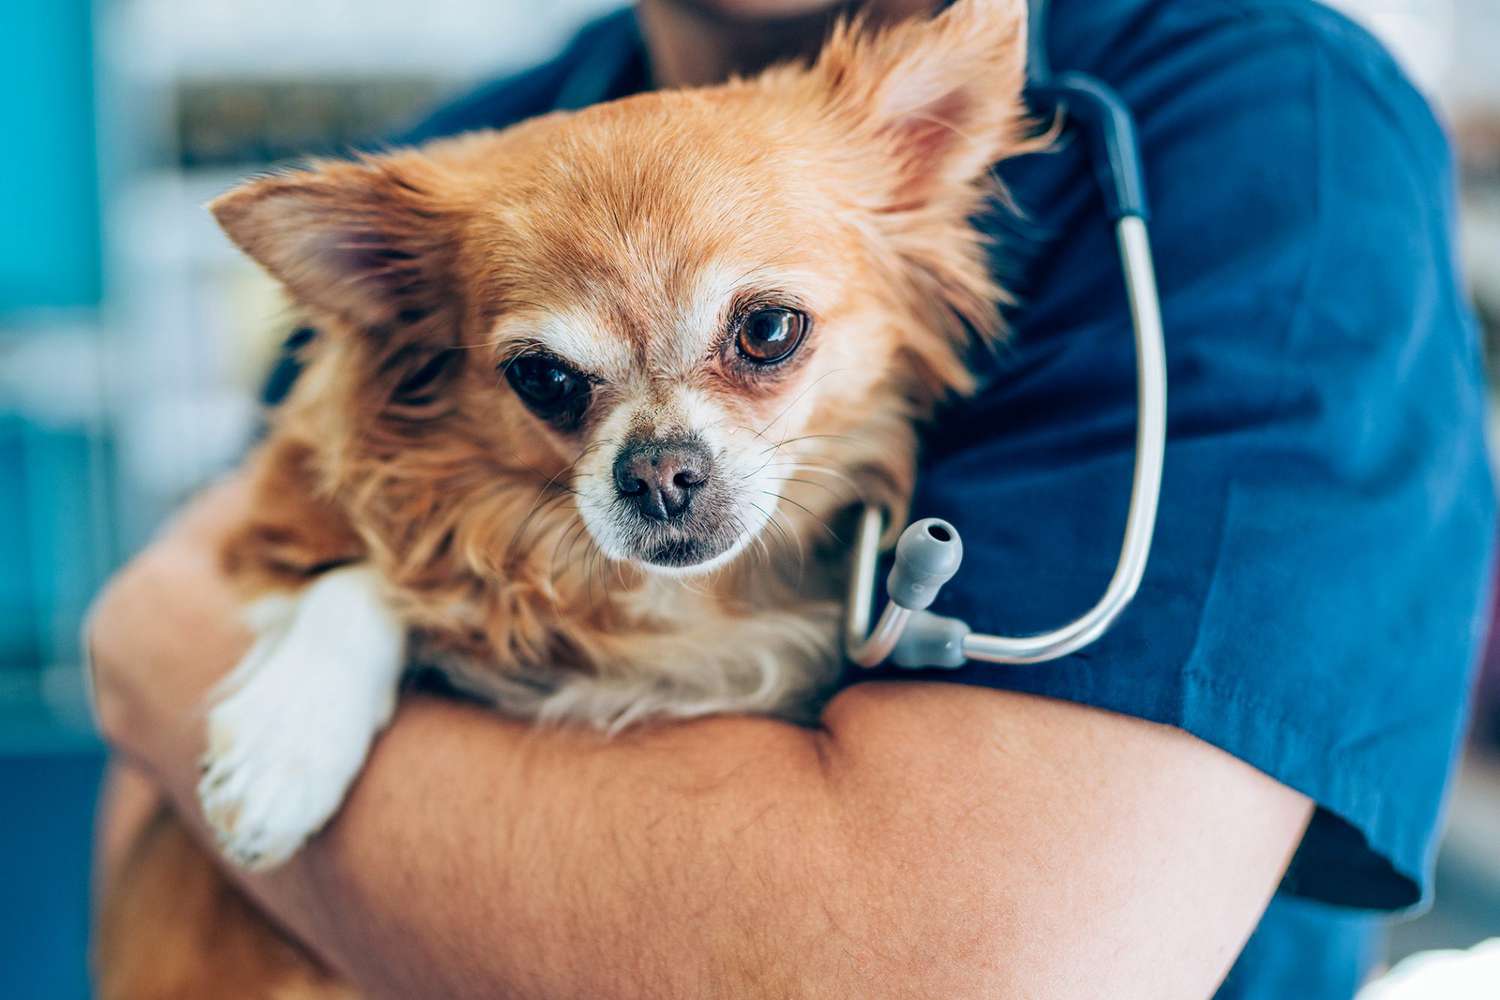 Antibiotics for Dogs: Uses, Side Effects, and Safety | Daily Paws